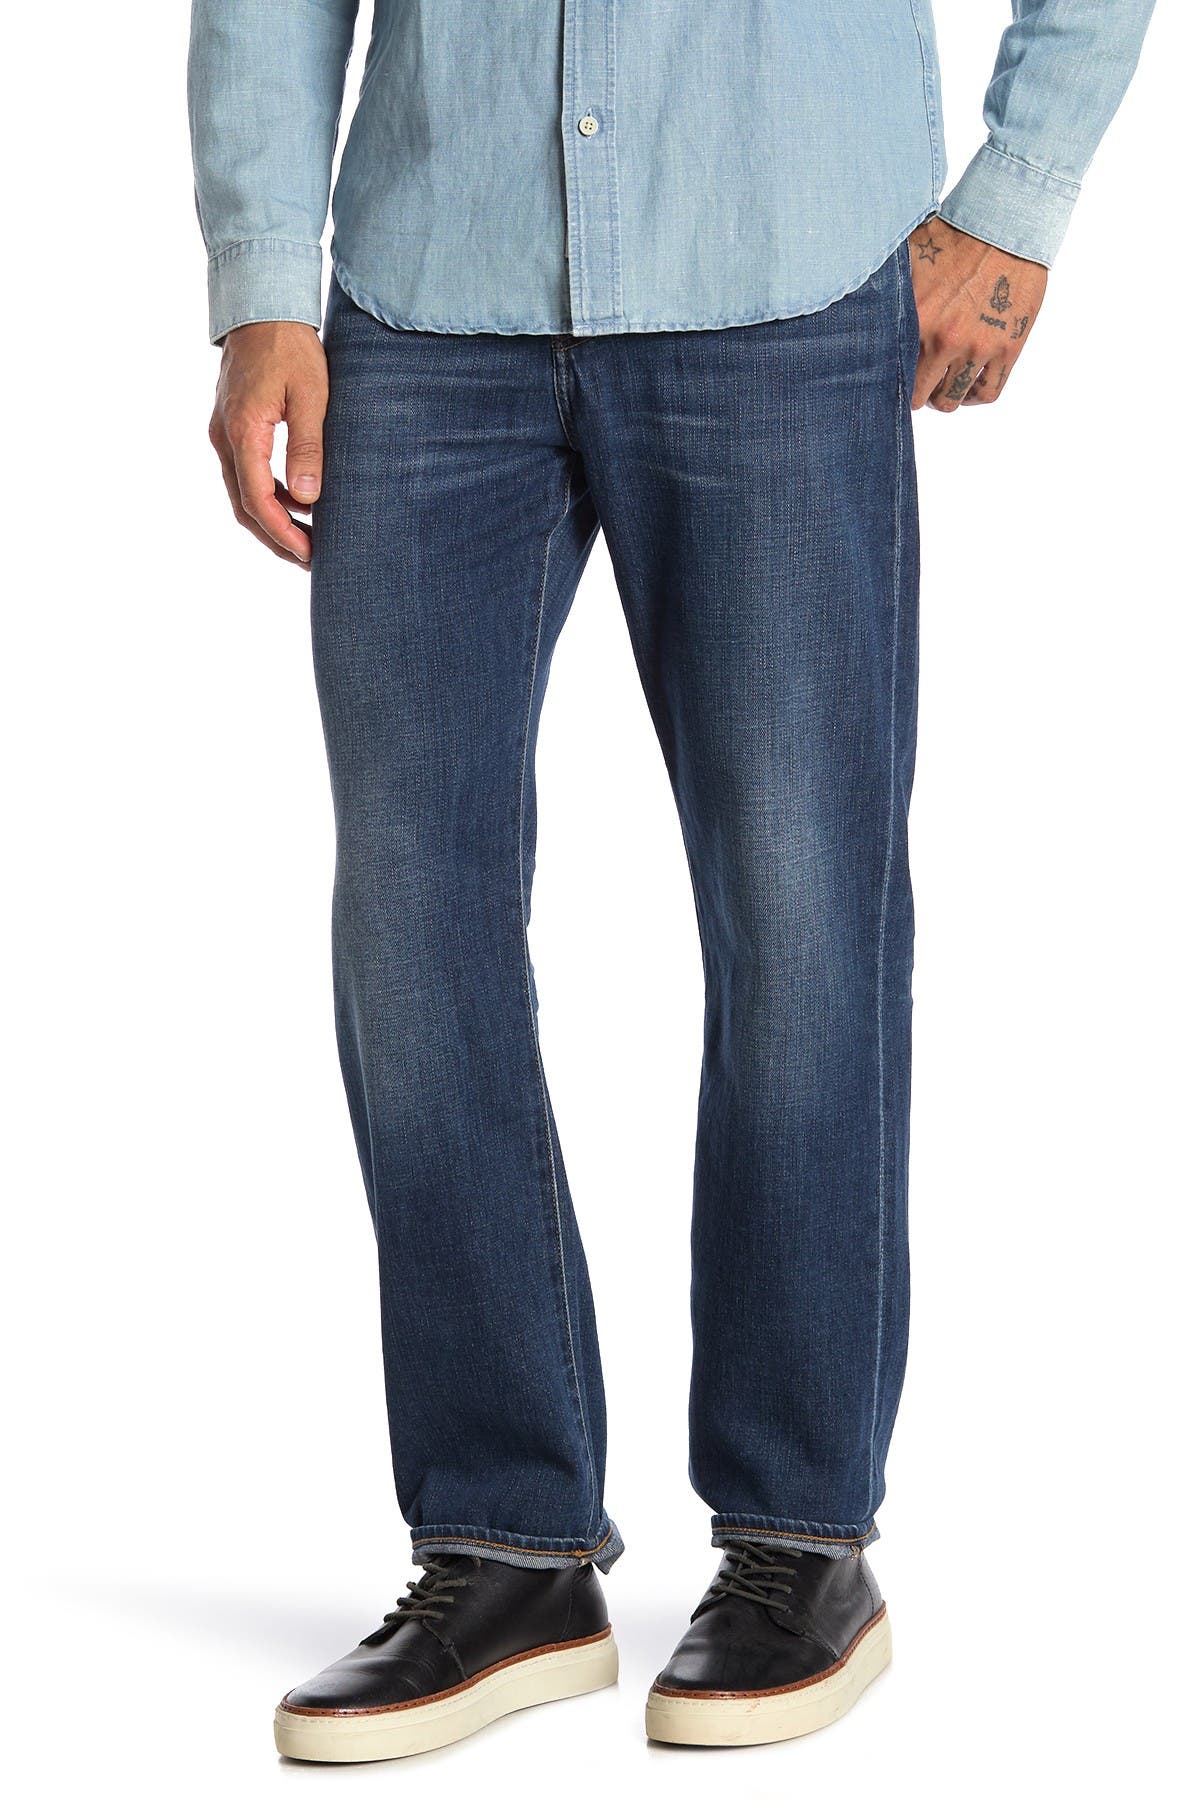 7 for all mankind jeans fit guide